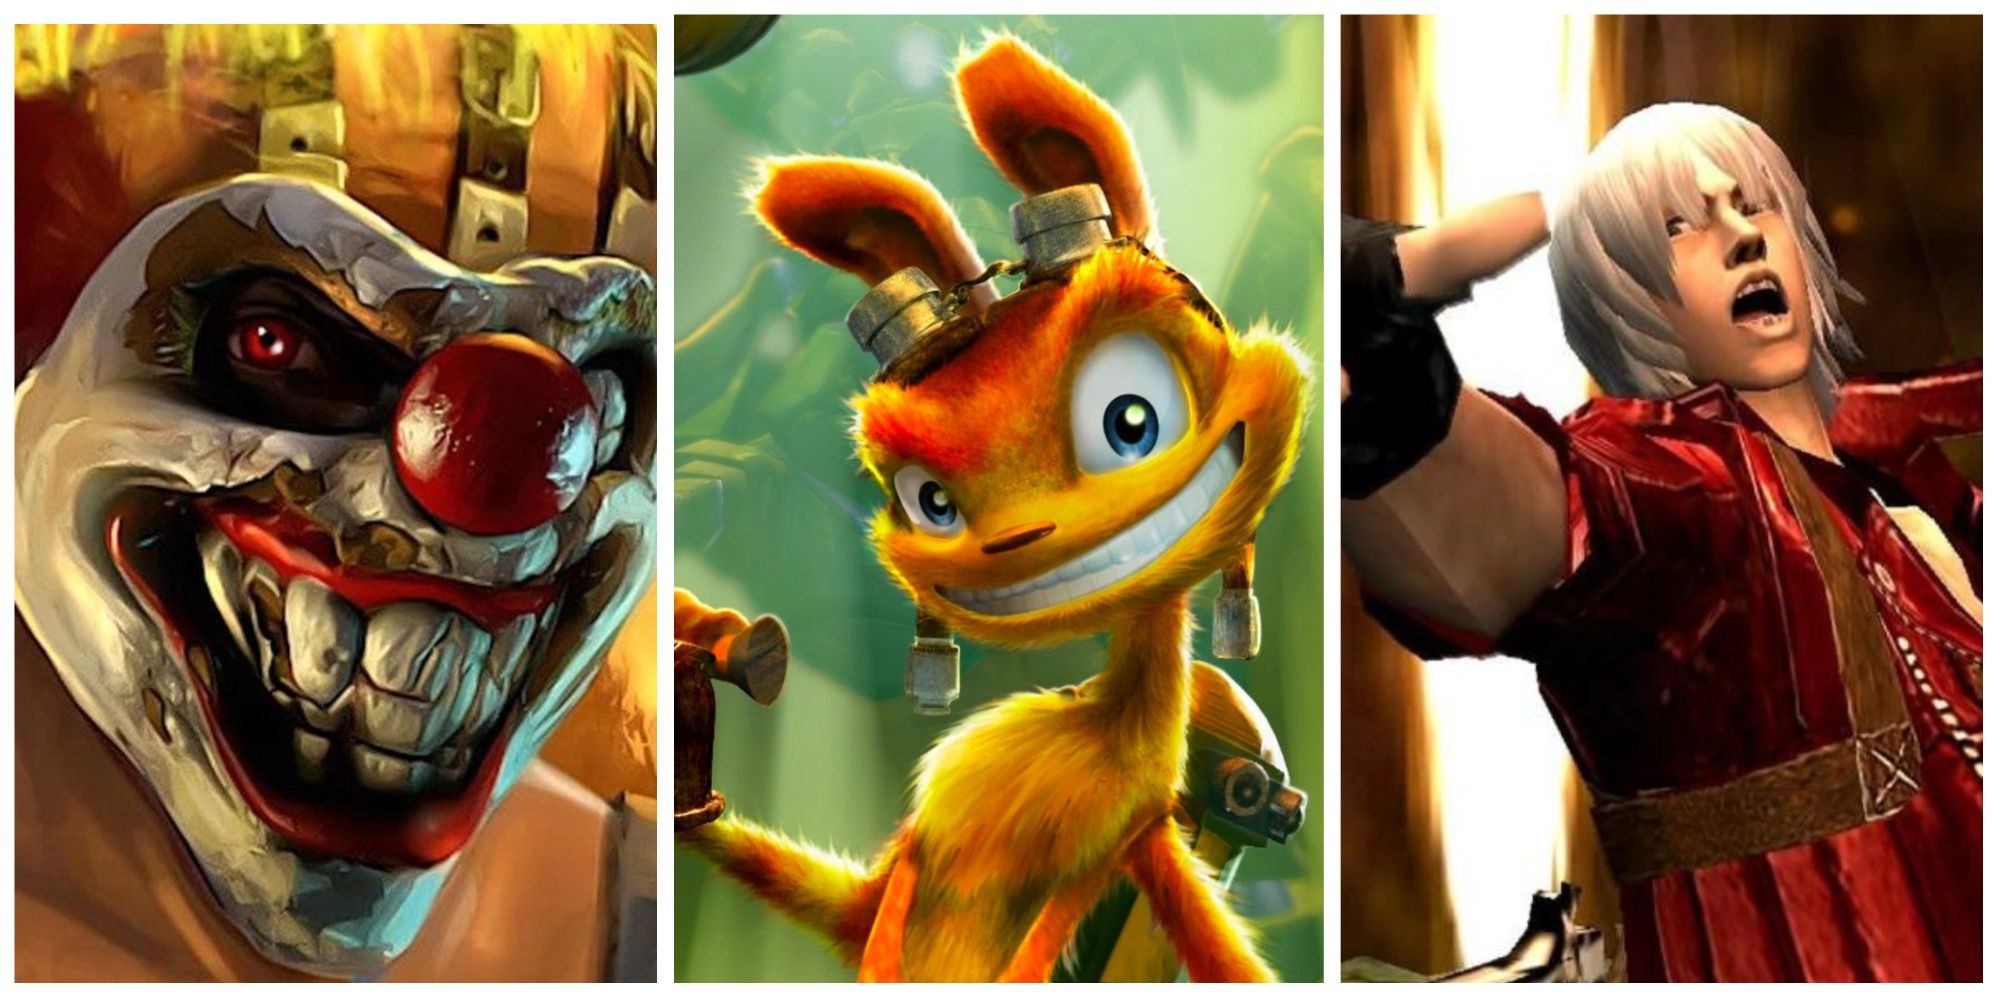 Collage of characters featuring Sweet Tooth from Twisted Metal, Daxter from Jak and Daxter, and Dante from Devil May Cry